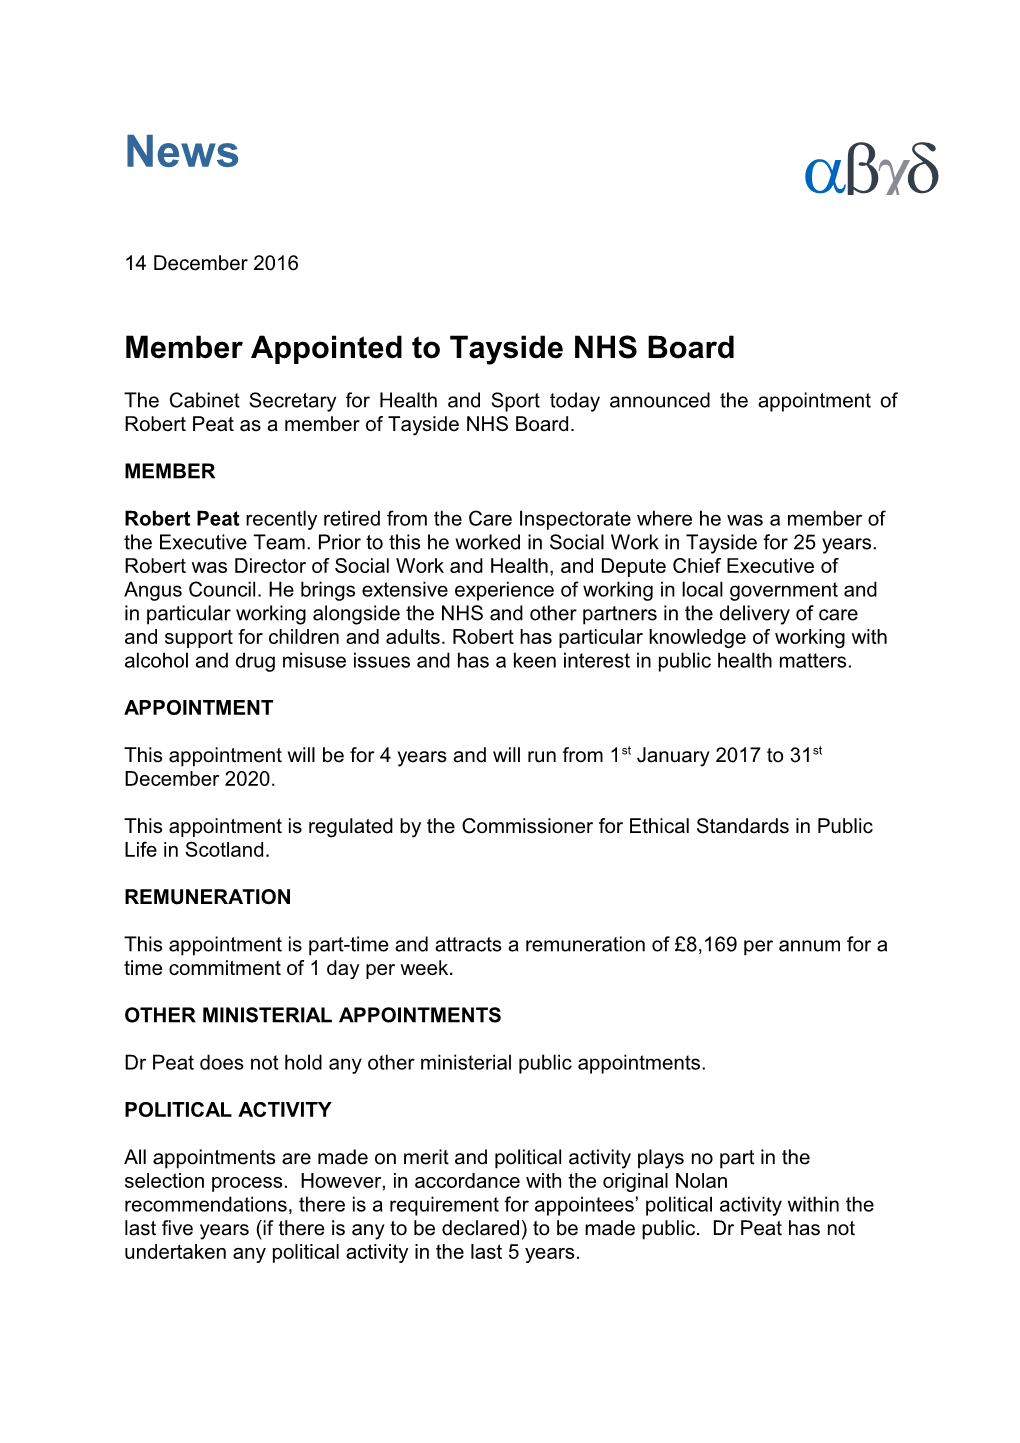 Member Appointed to Tayside NHS Board